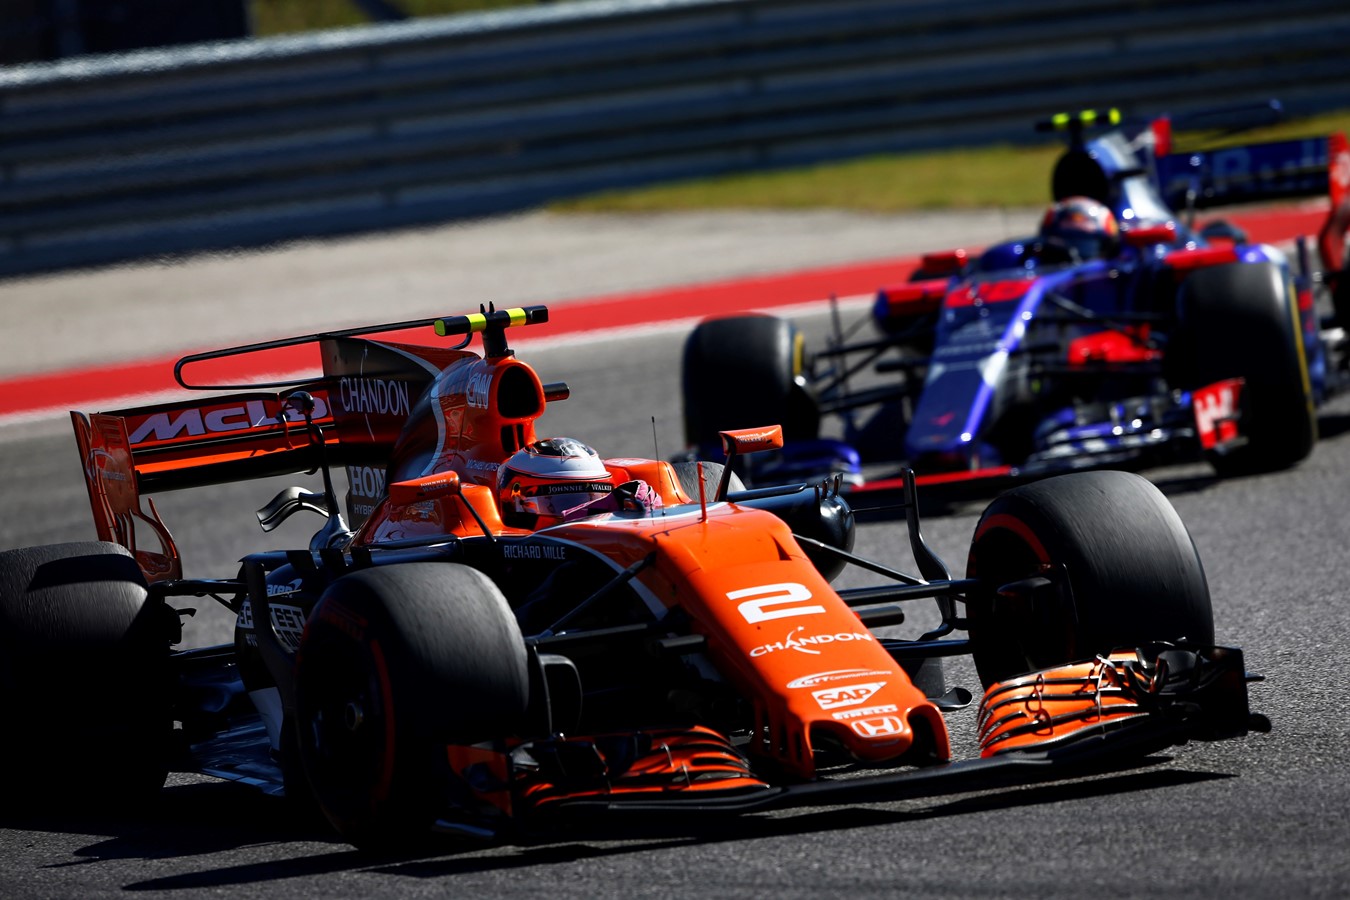 Disappointing race in America for McLaren-Honda